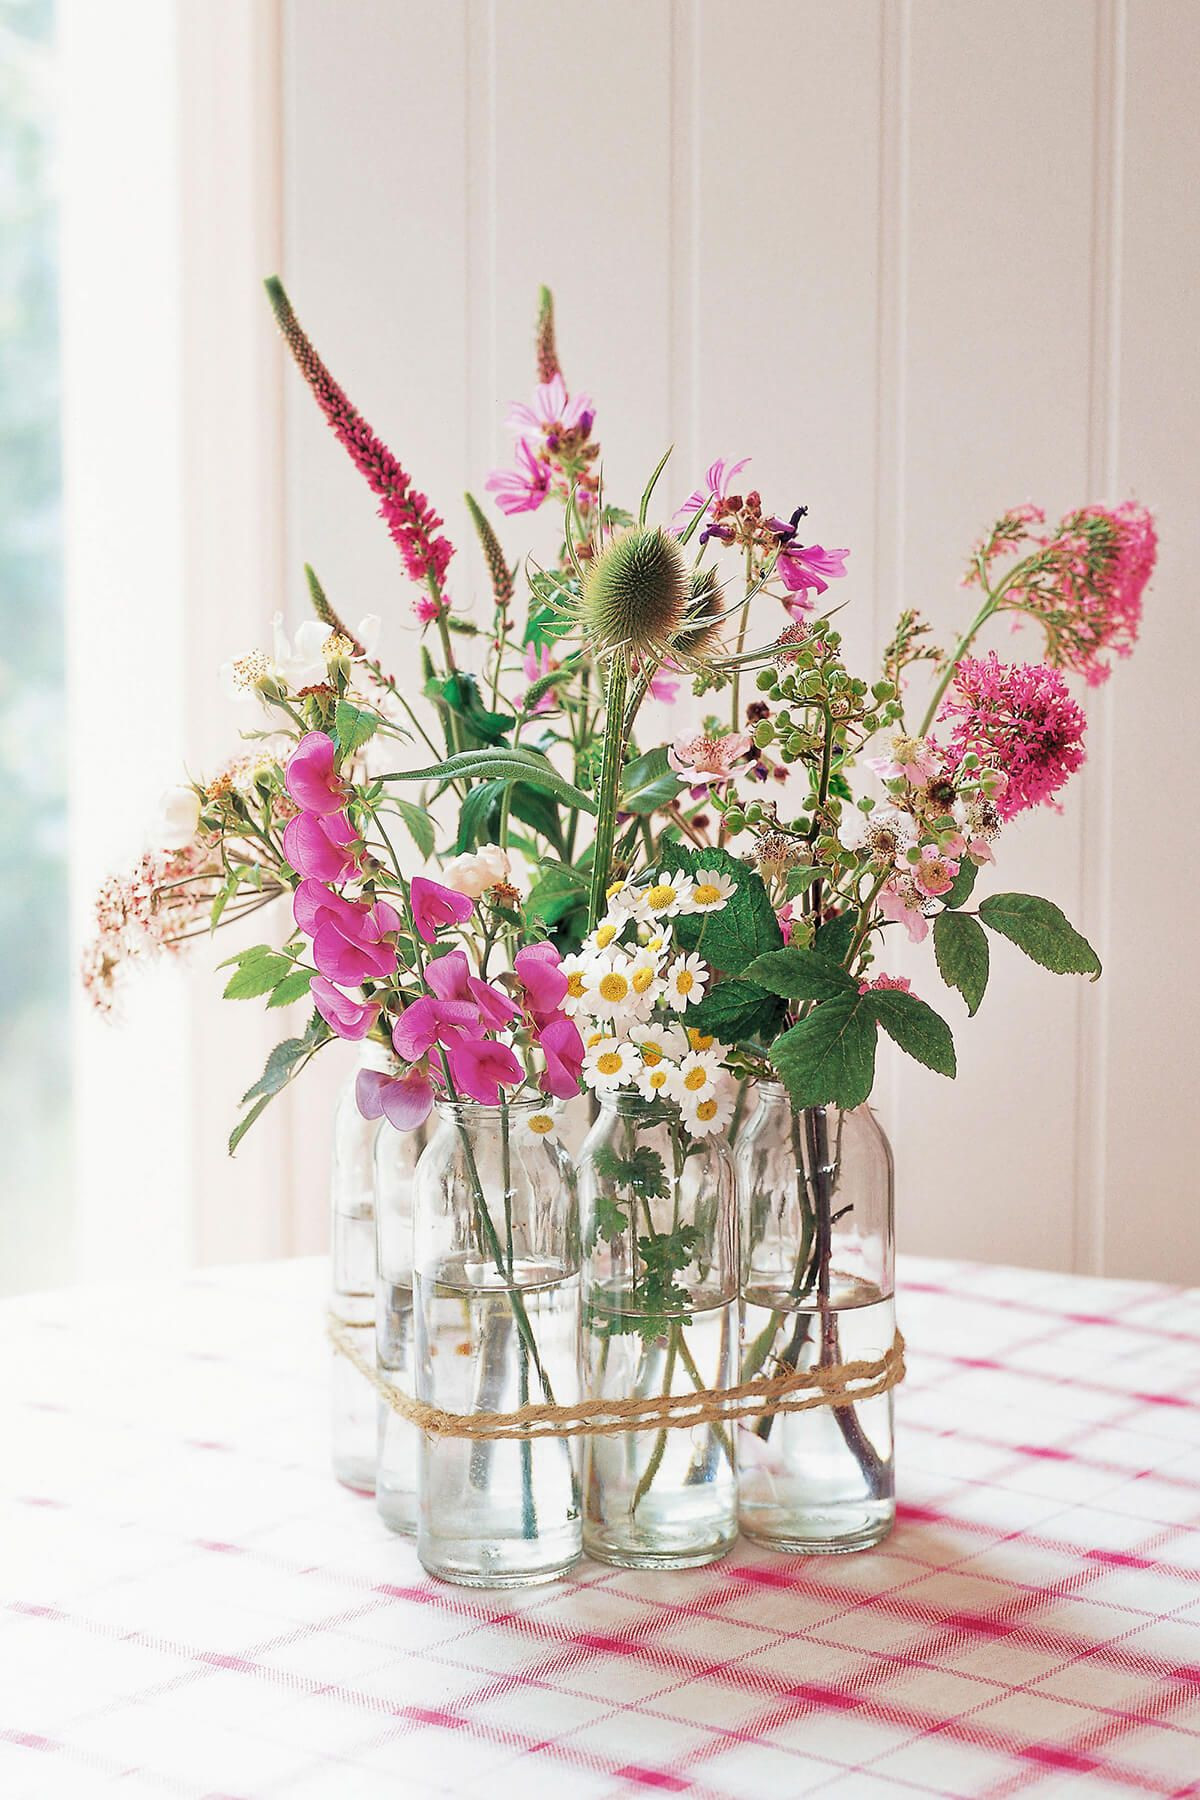 16 Recommended Small Glass Vase Flower Arrangements 2024 free download small glass vase flower arrangements of 36 flower arrangement ideas to brighten any occasion easter with entwined collection of wildflower bud bases